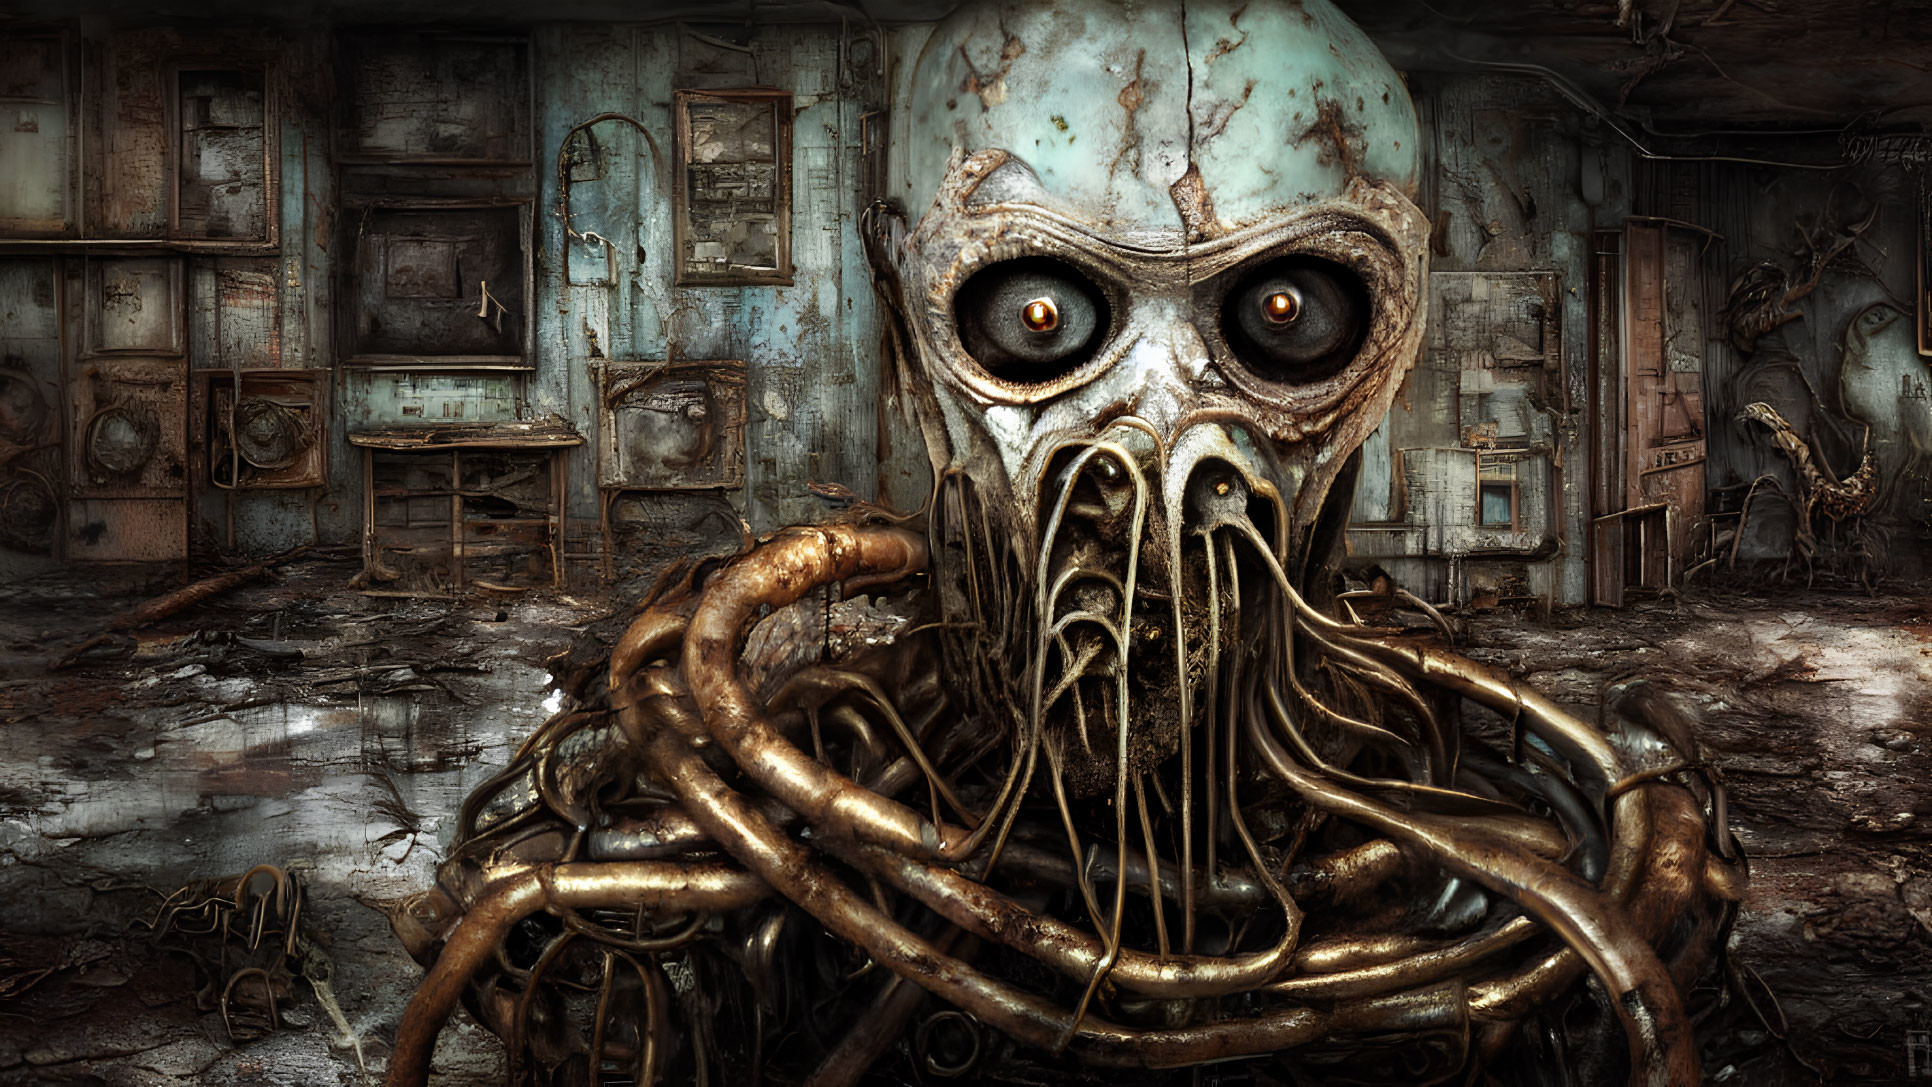 Surreal monstrous entity with skull face and tentacles in industrial setting